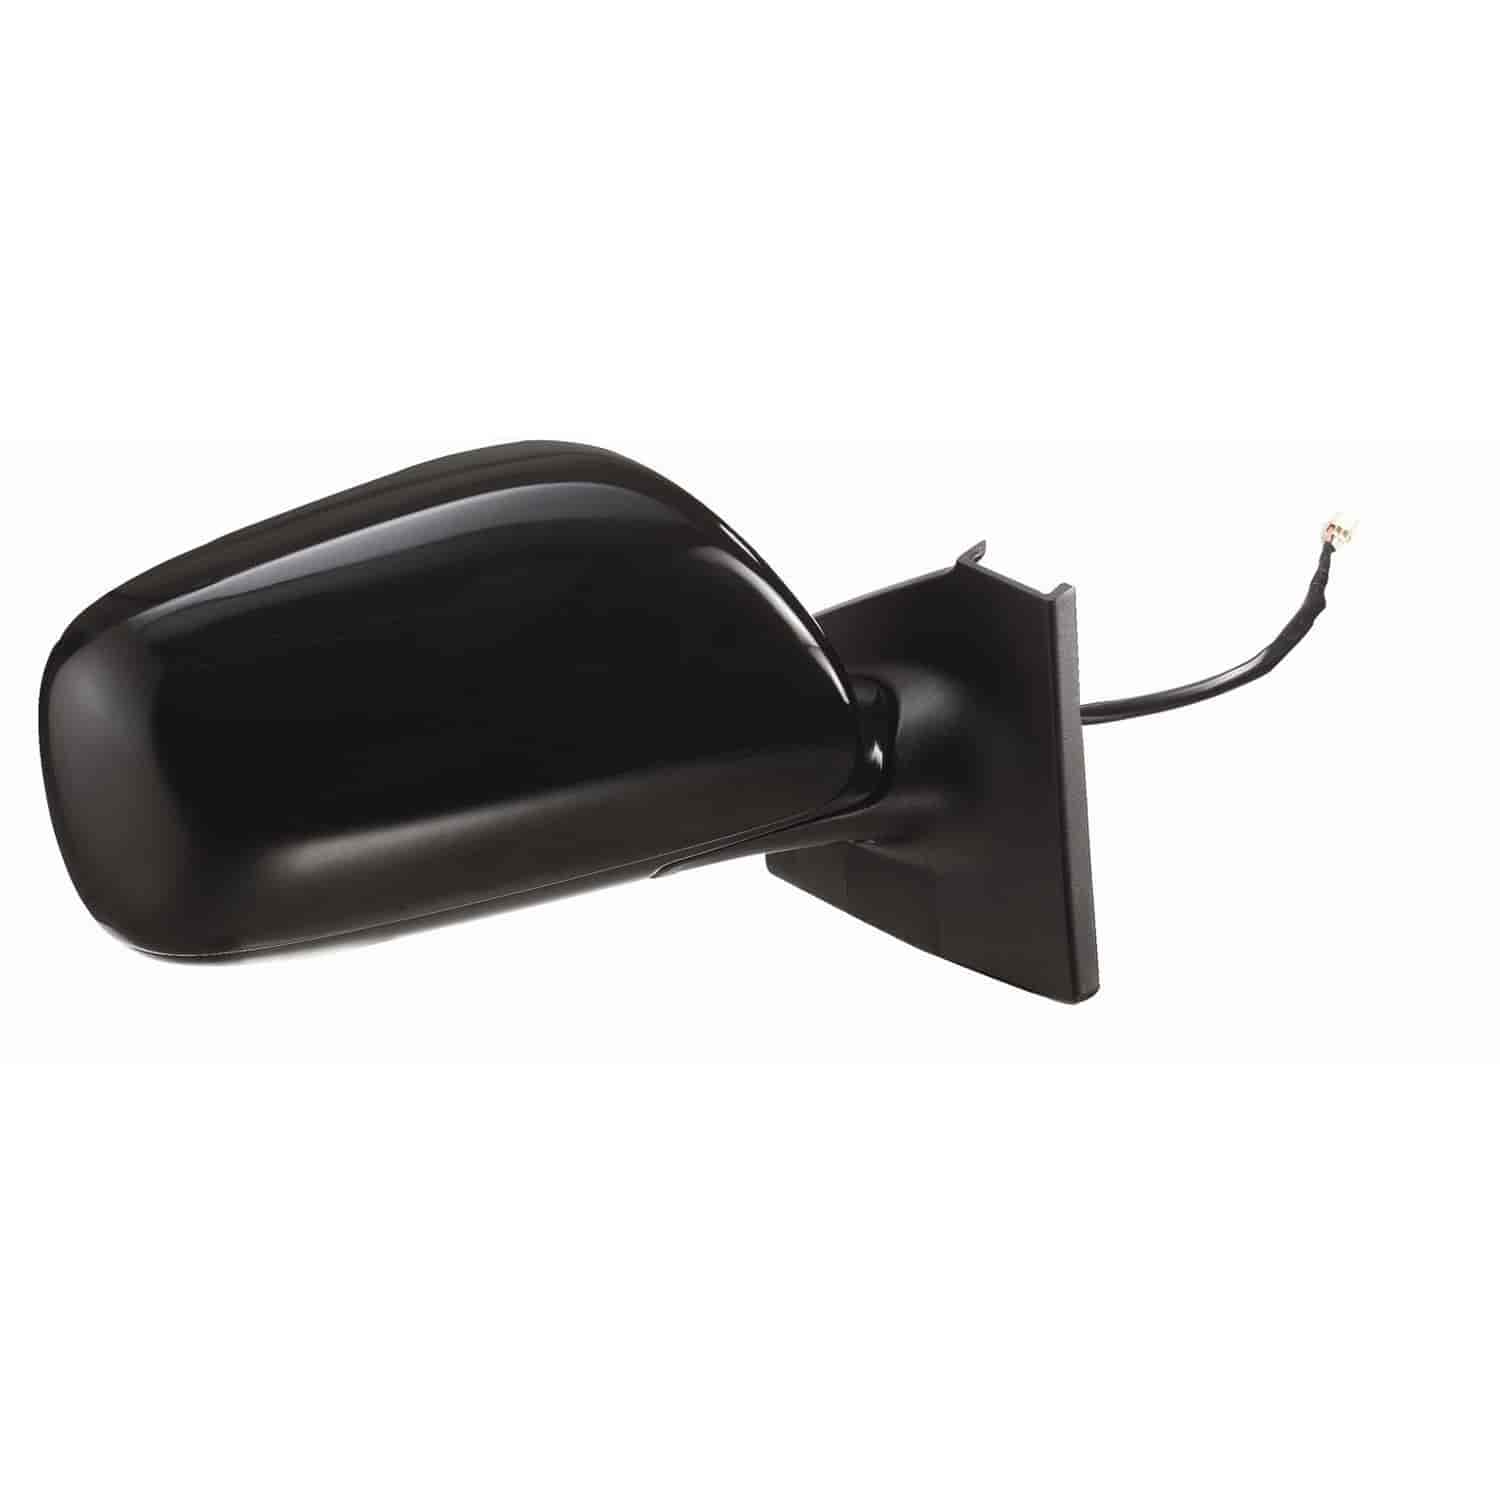 OEM Style Replacement mirror for 07-11 Toyota Yaris Hatchback passenger side mirror tested to fit an